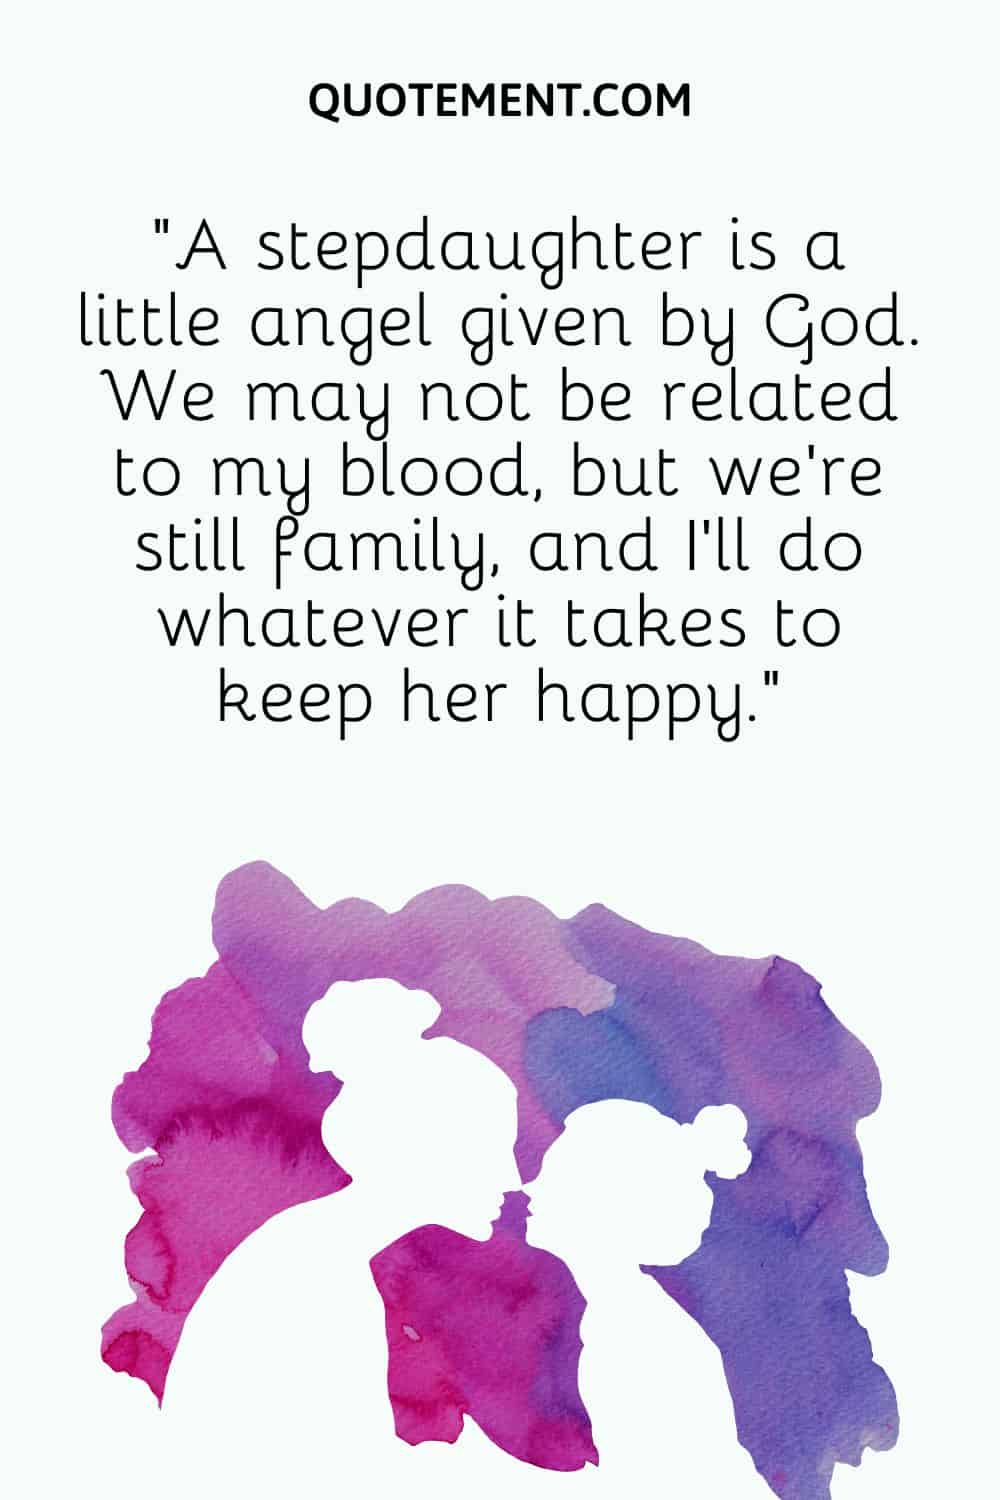 A stepdaughter is a little angel given by God